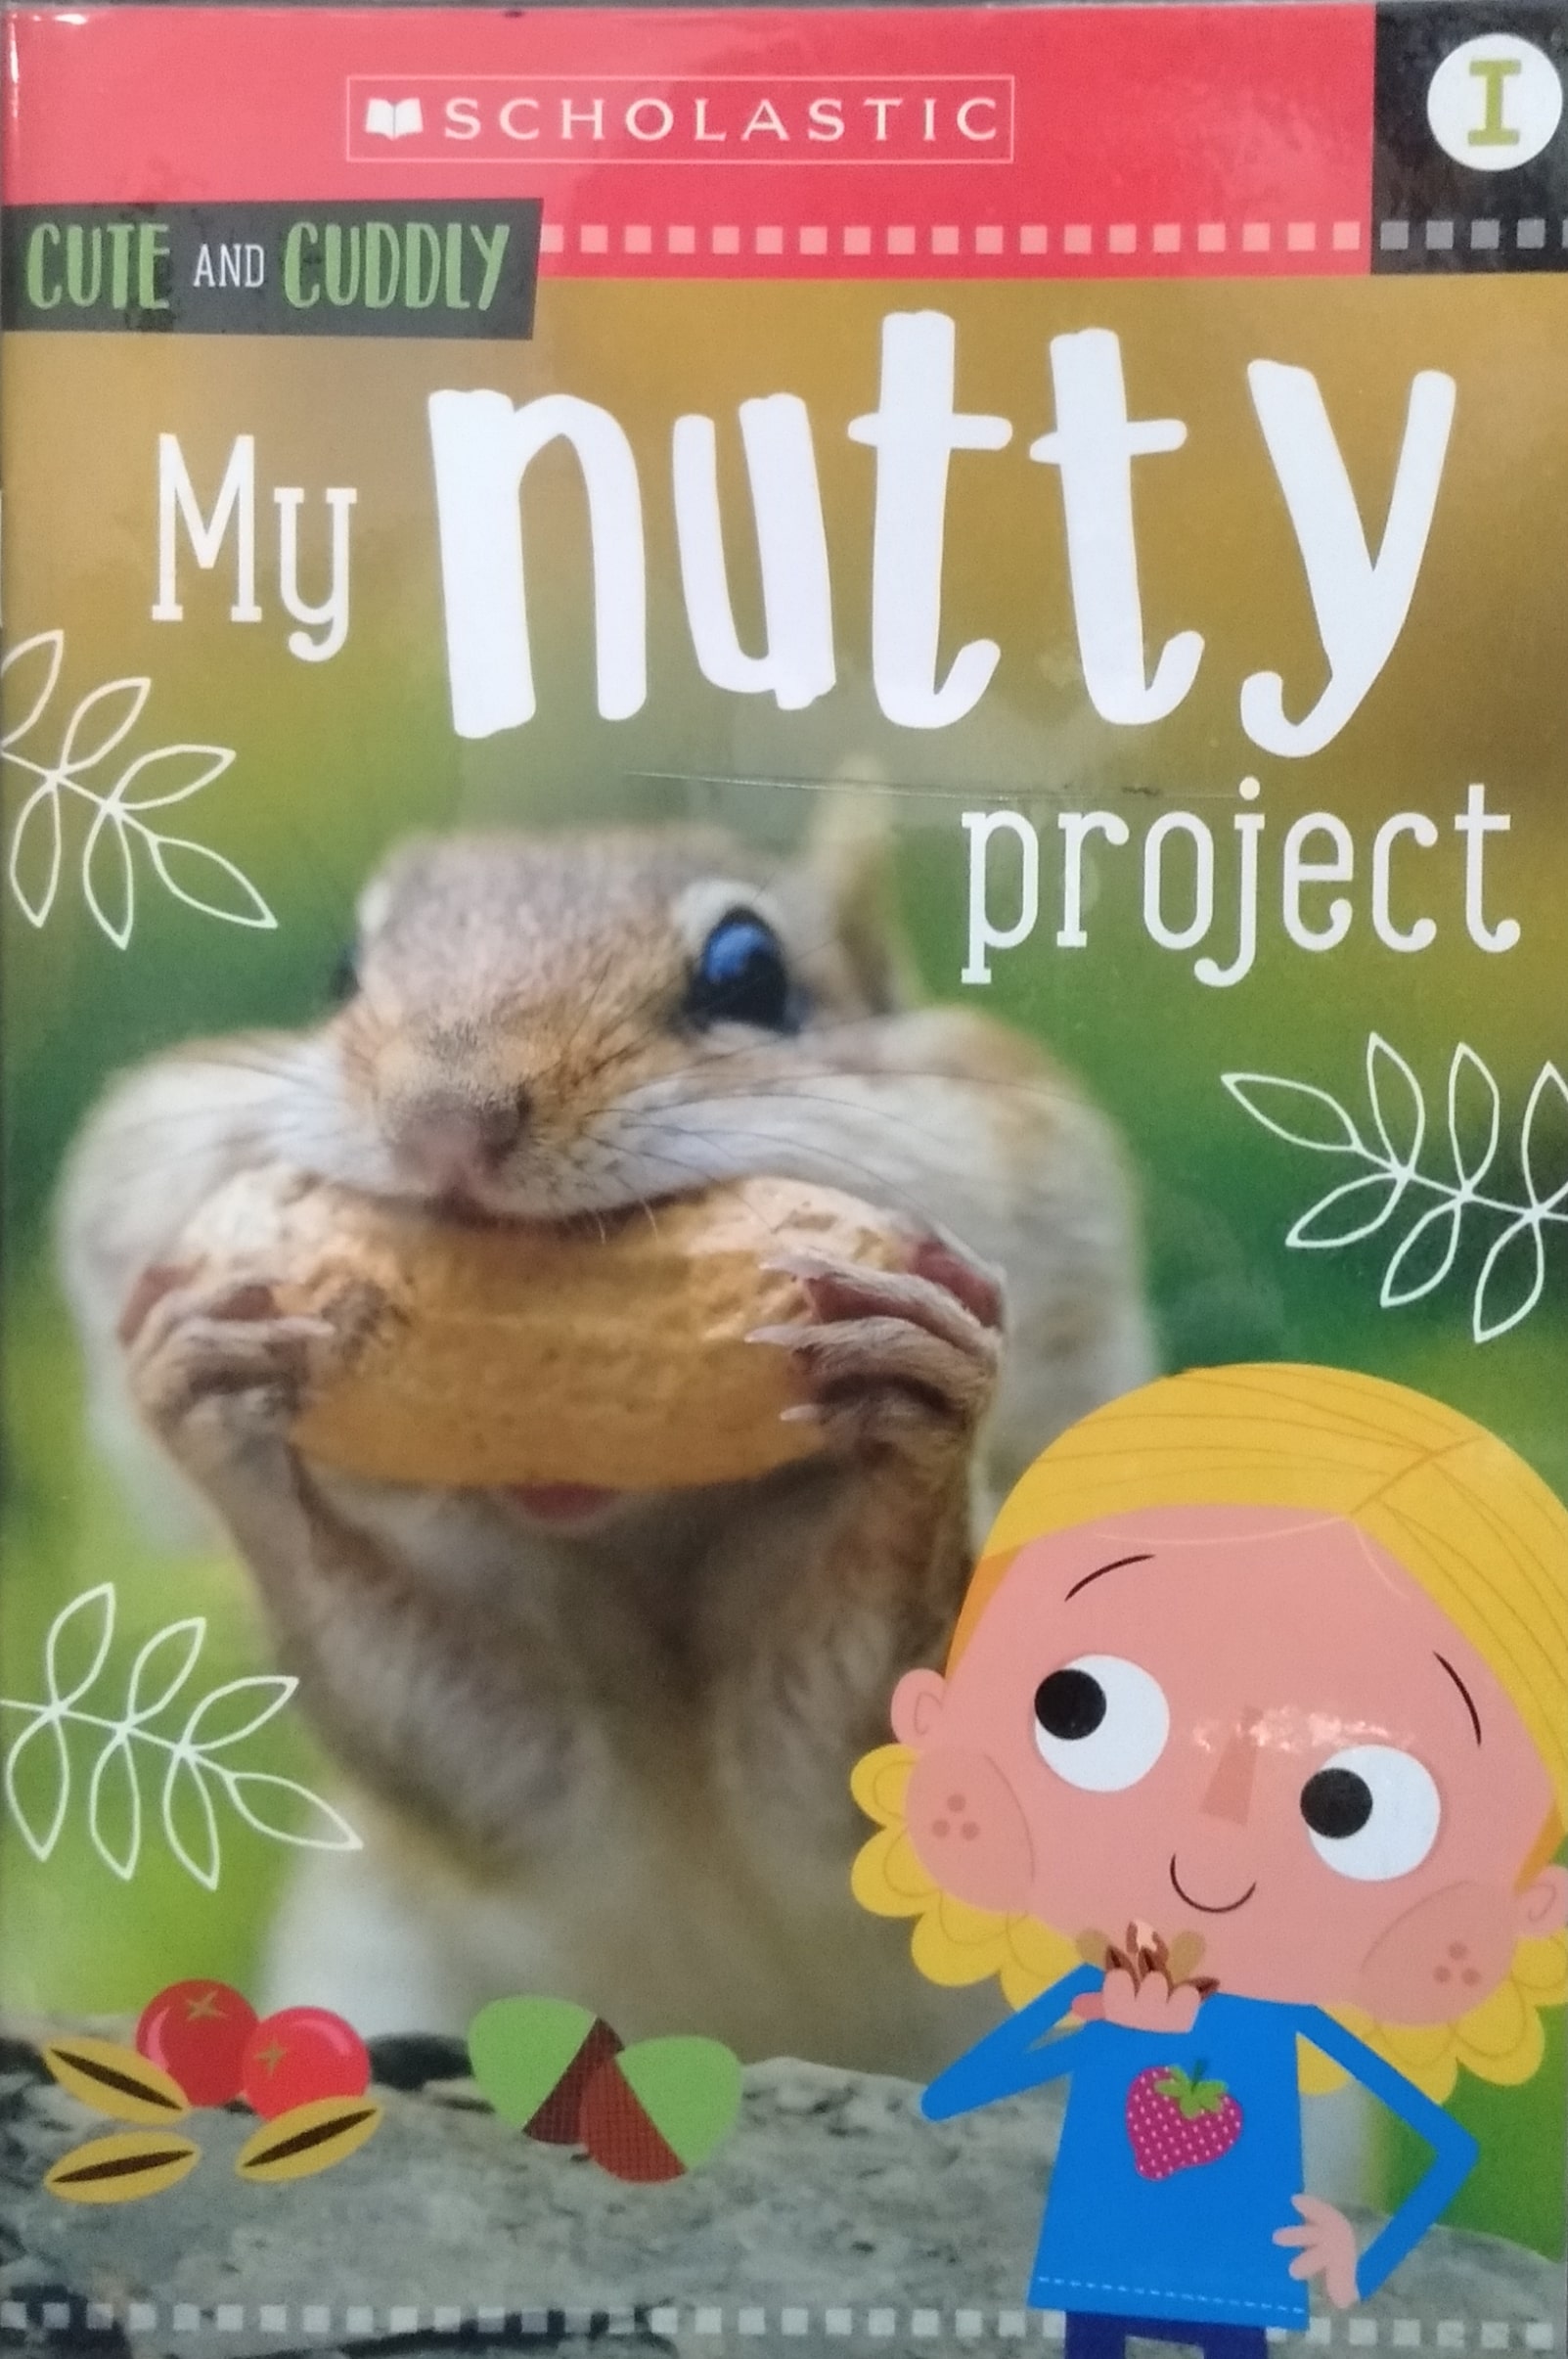 IMG : Animal Antics Cute and Cuddly My nutty project